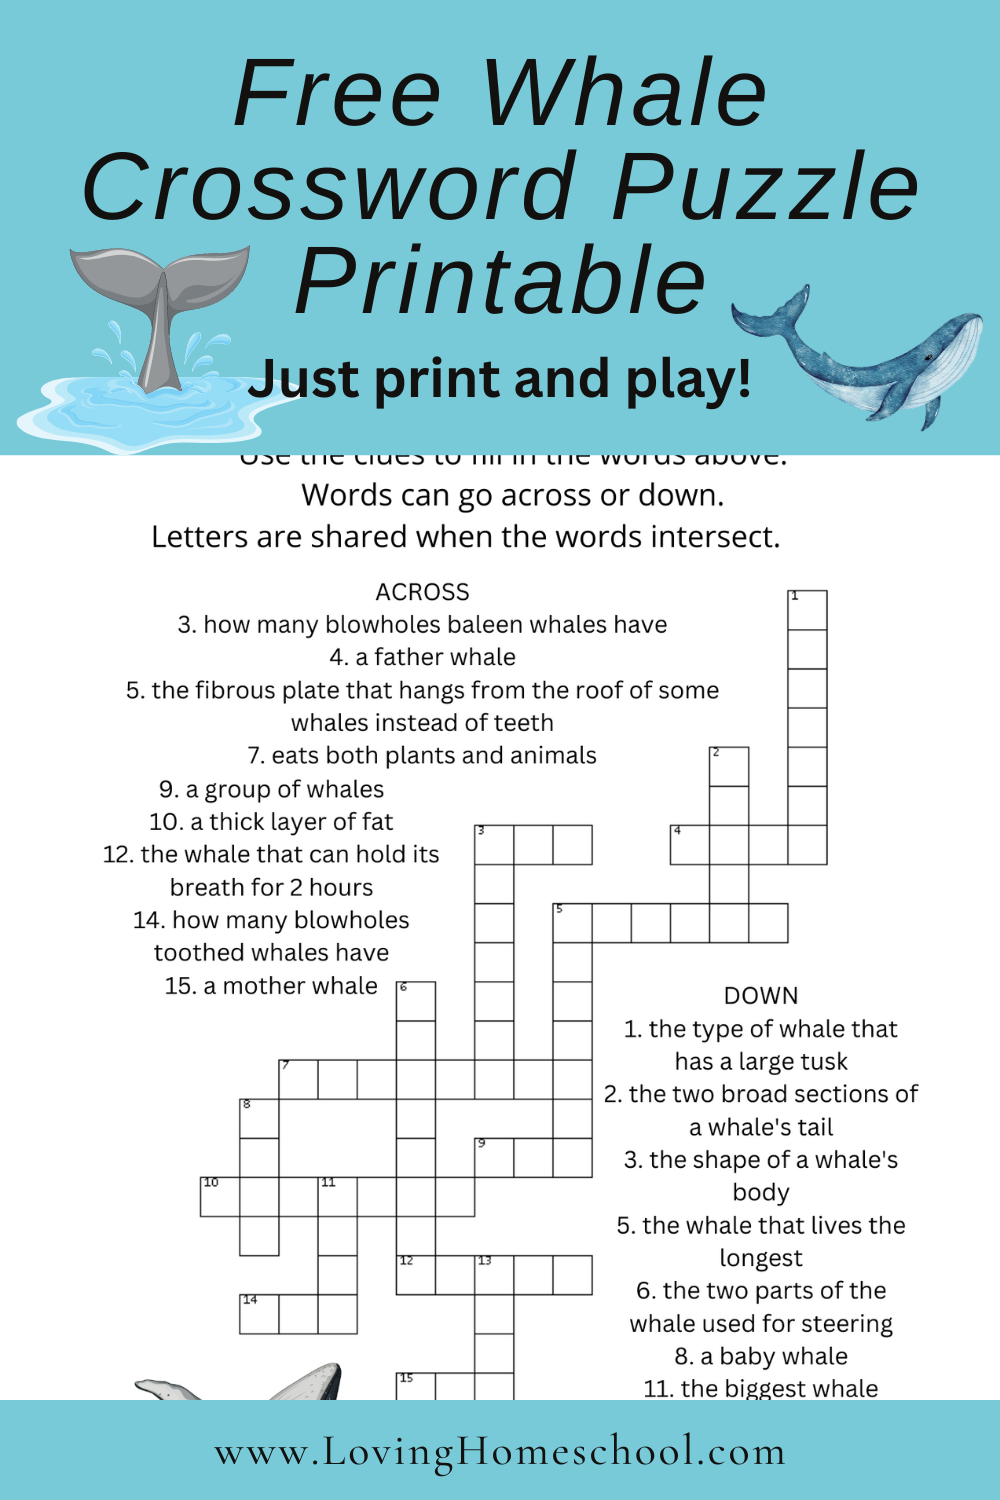 Free Whale Crossword Puzzle Printable Pinterest Pin